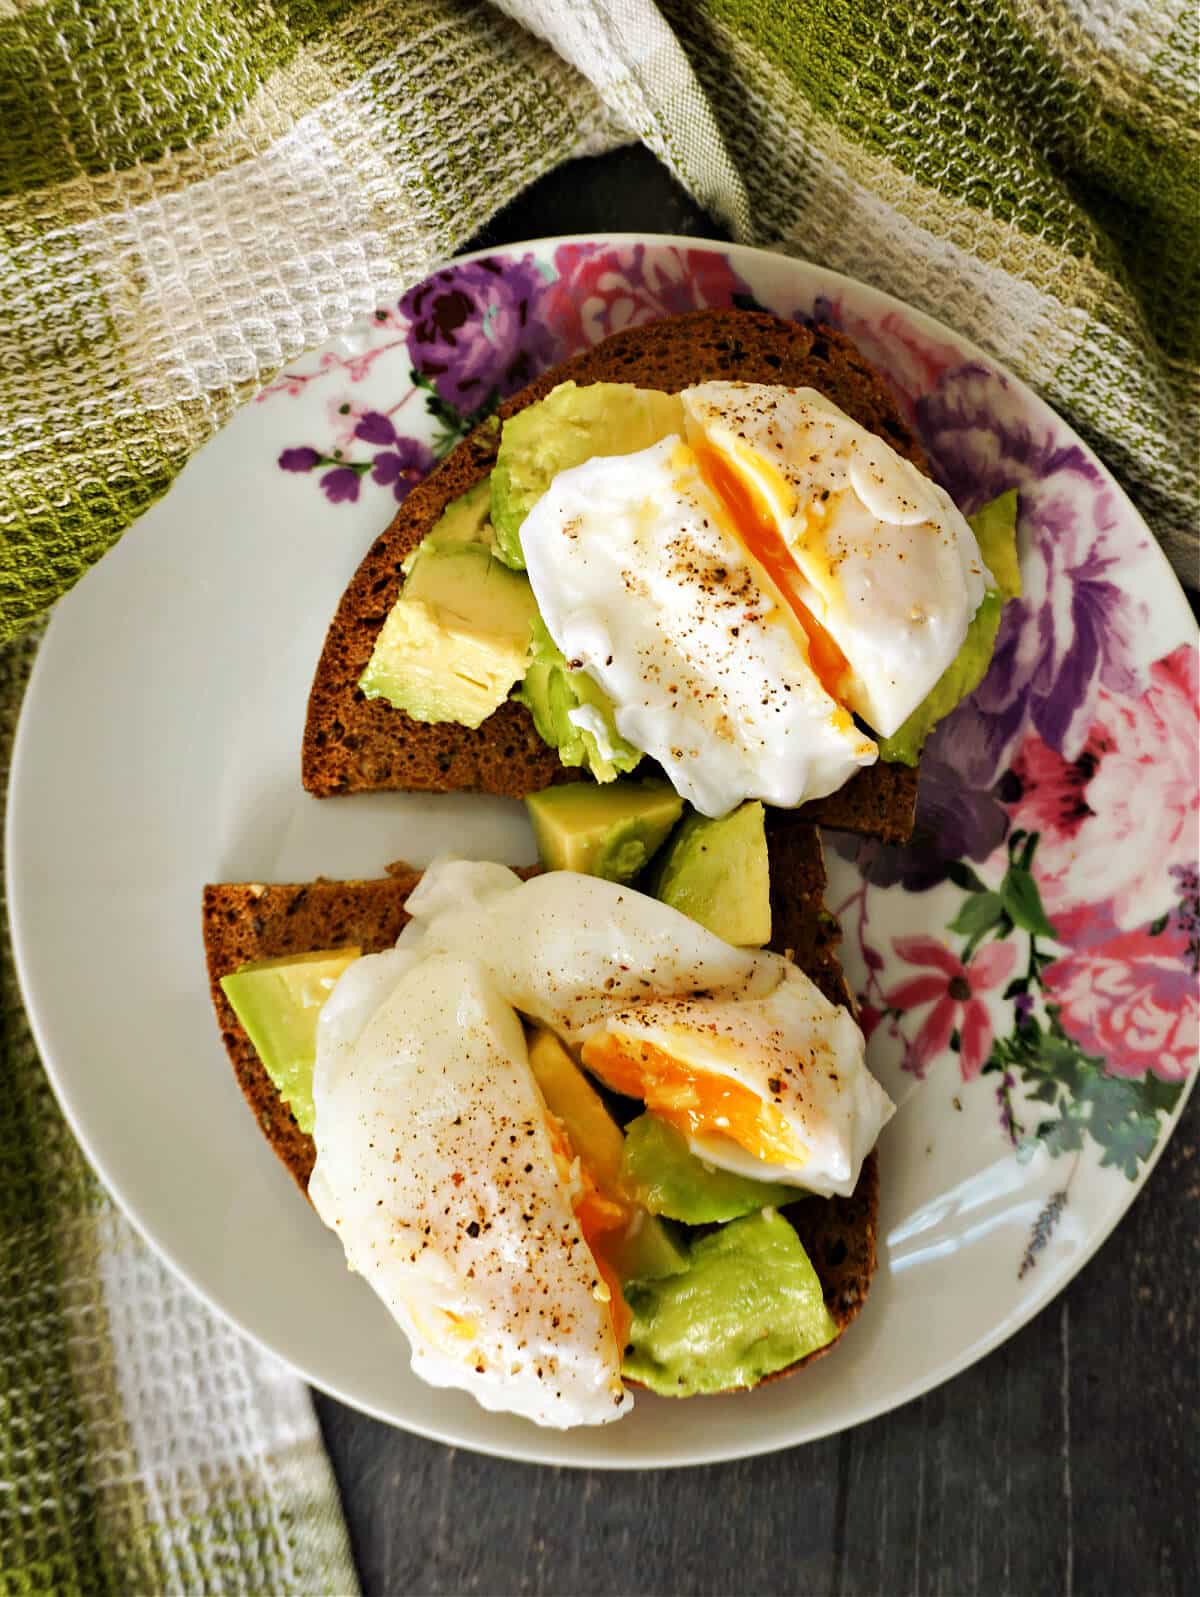 Overhead shoot of a plate with 2 slices of bread with avocado and poached eggs on top.